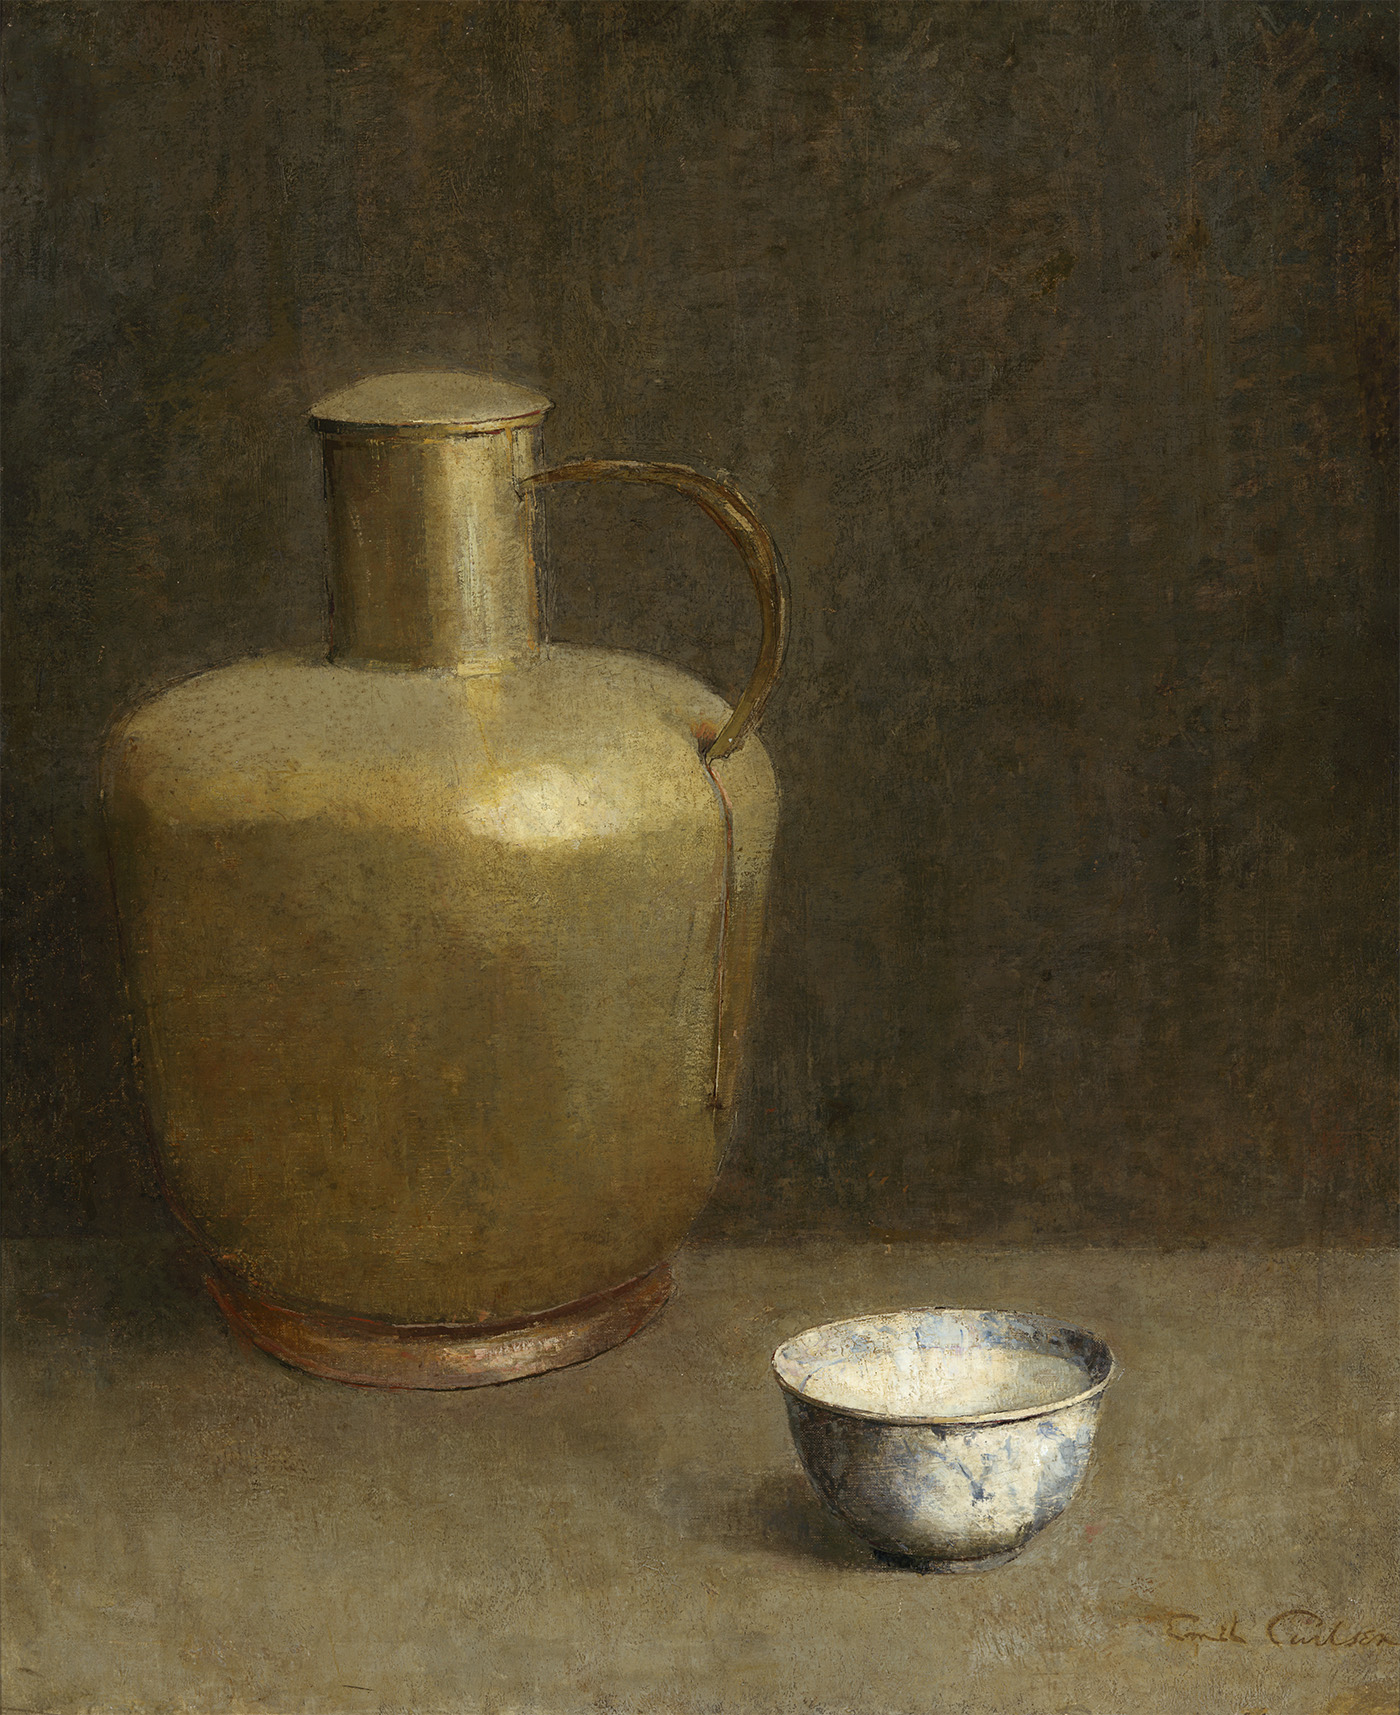 Emil Carlsen : Clay vessel and china bowl, ca.1922.